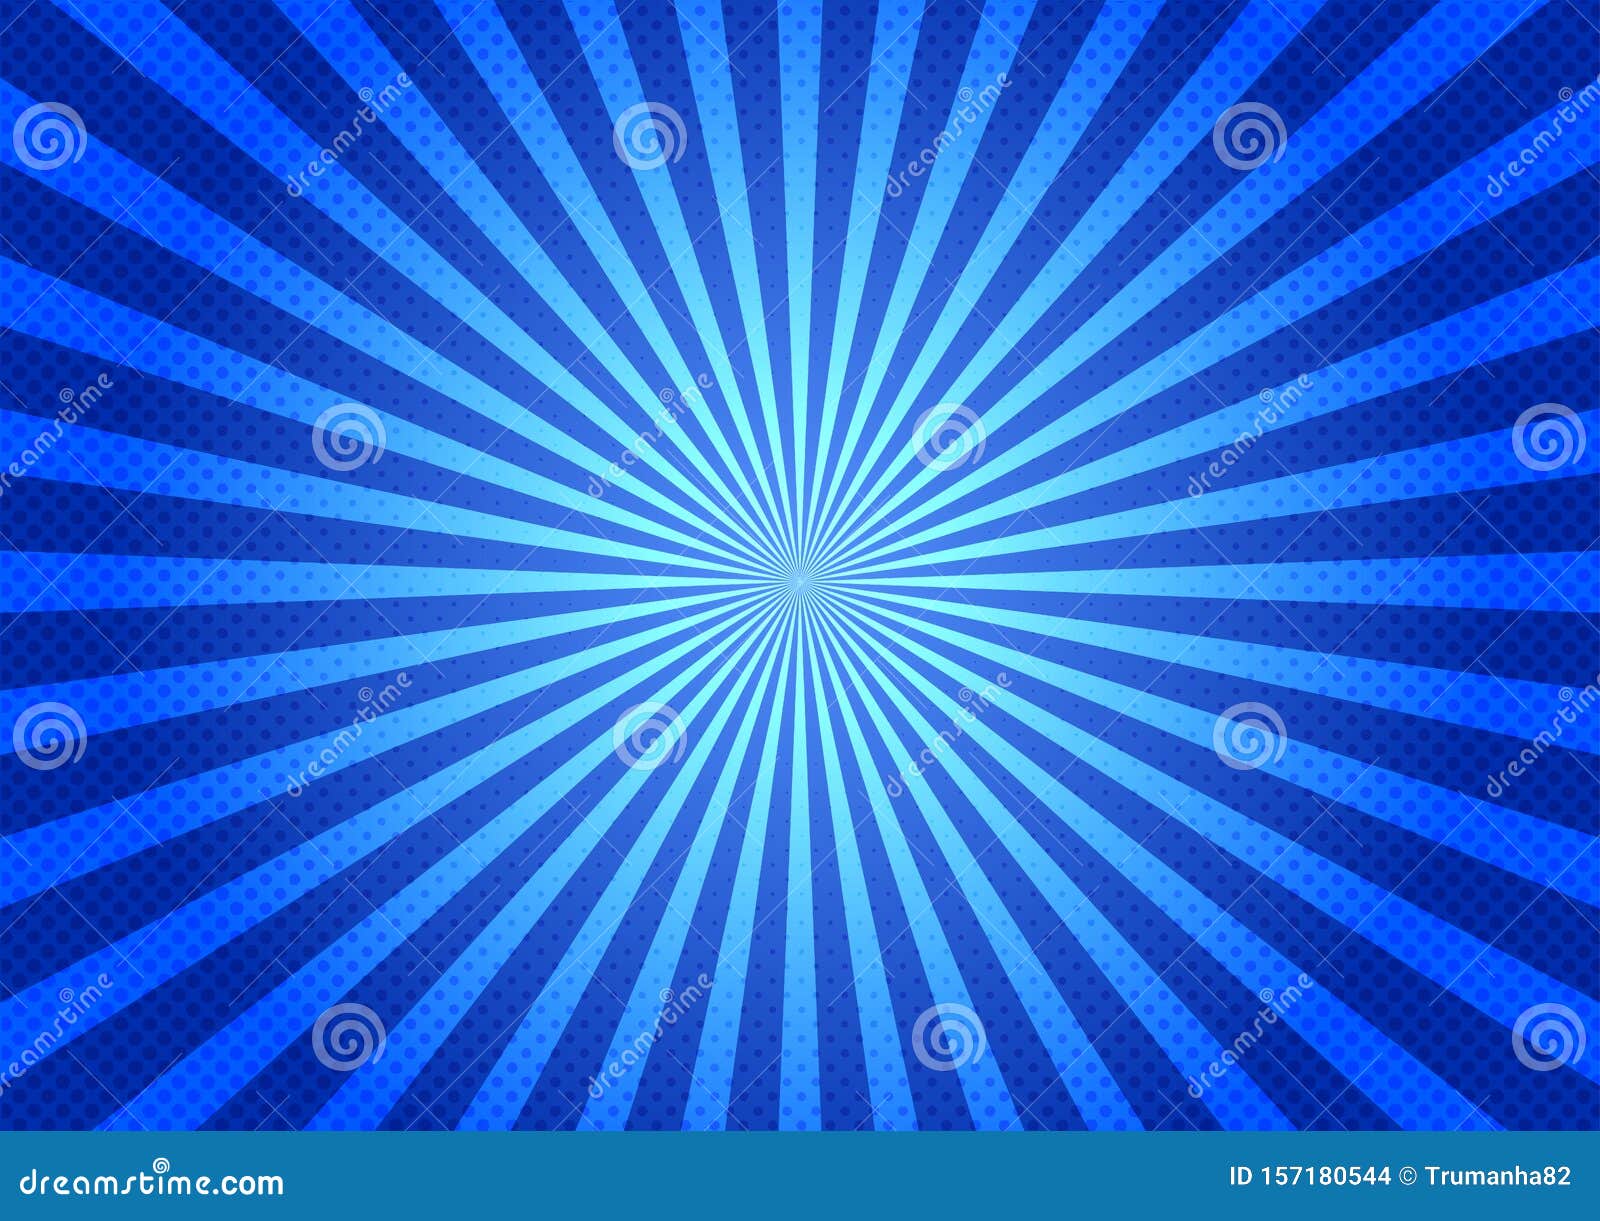 blue comic background with zoom effect and halftone dots pattern